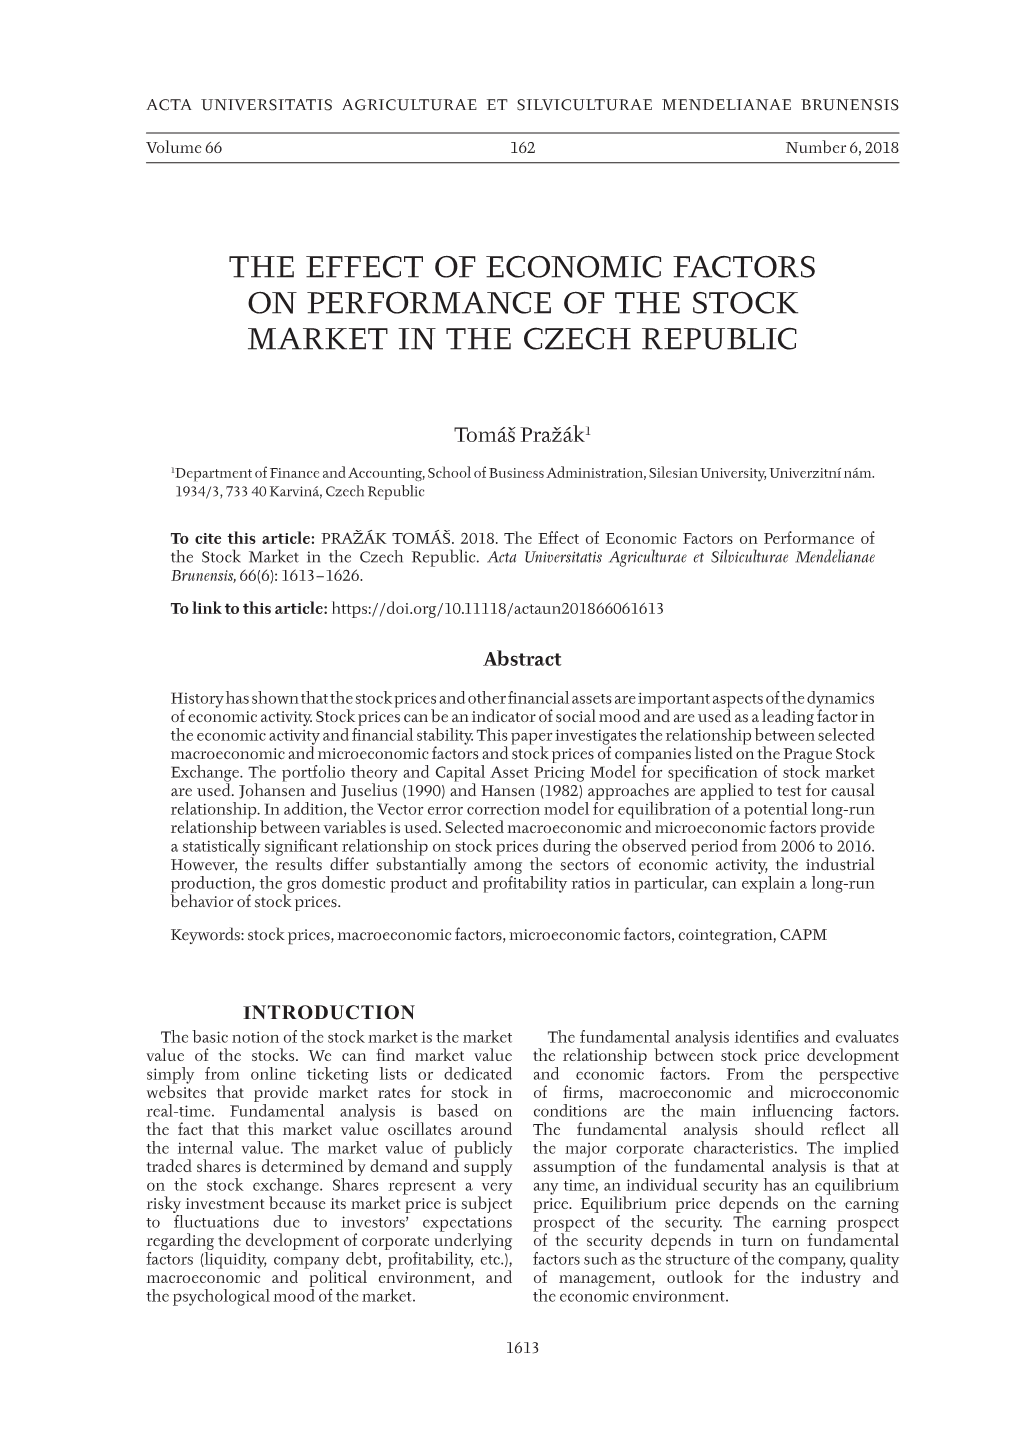 The Effect of Economic Factors on Performance of the Stock Market in the Czech Republic